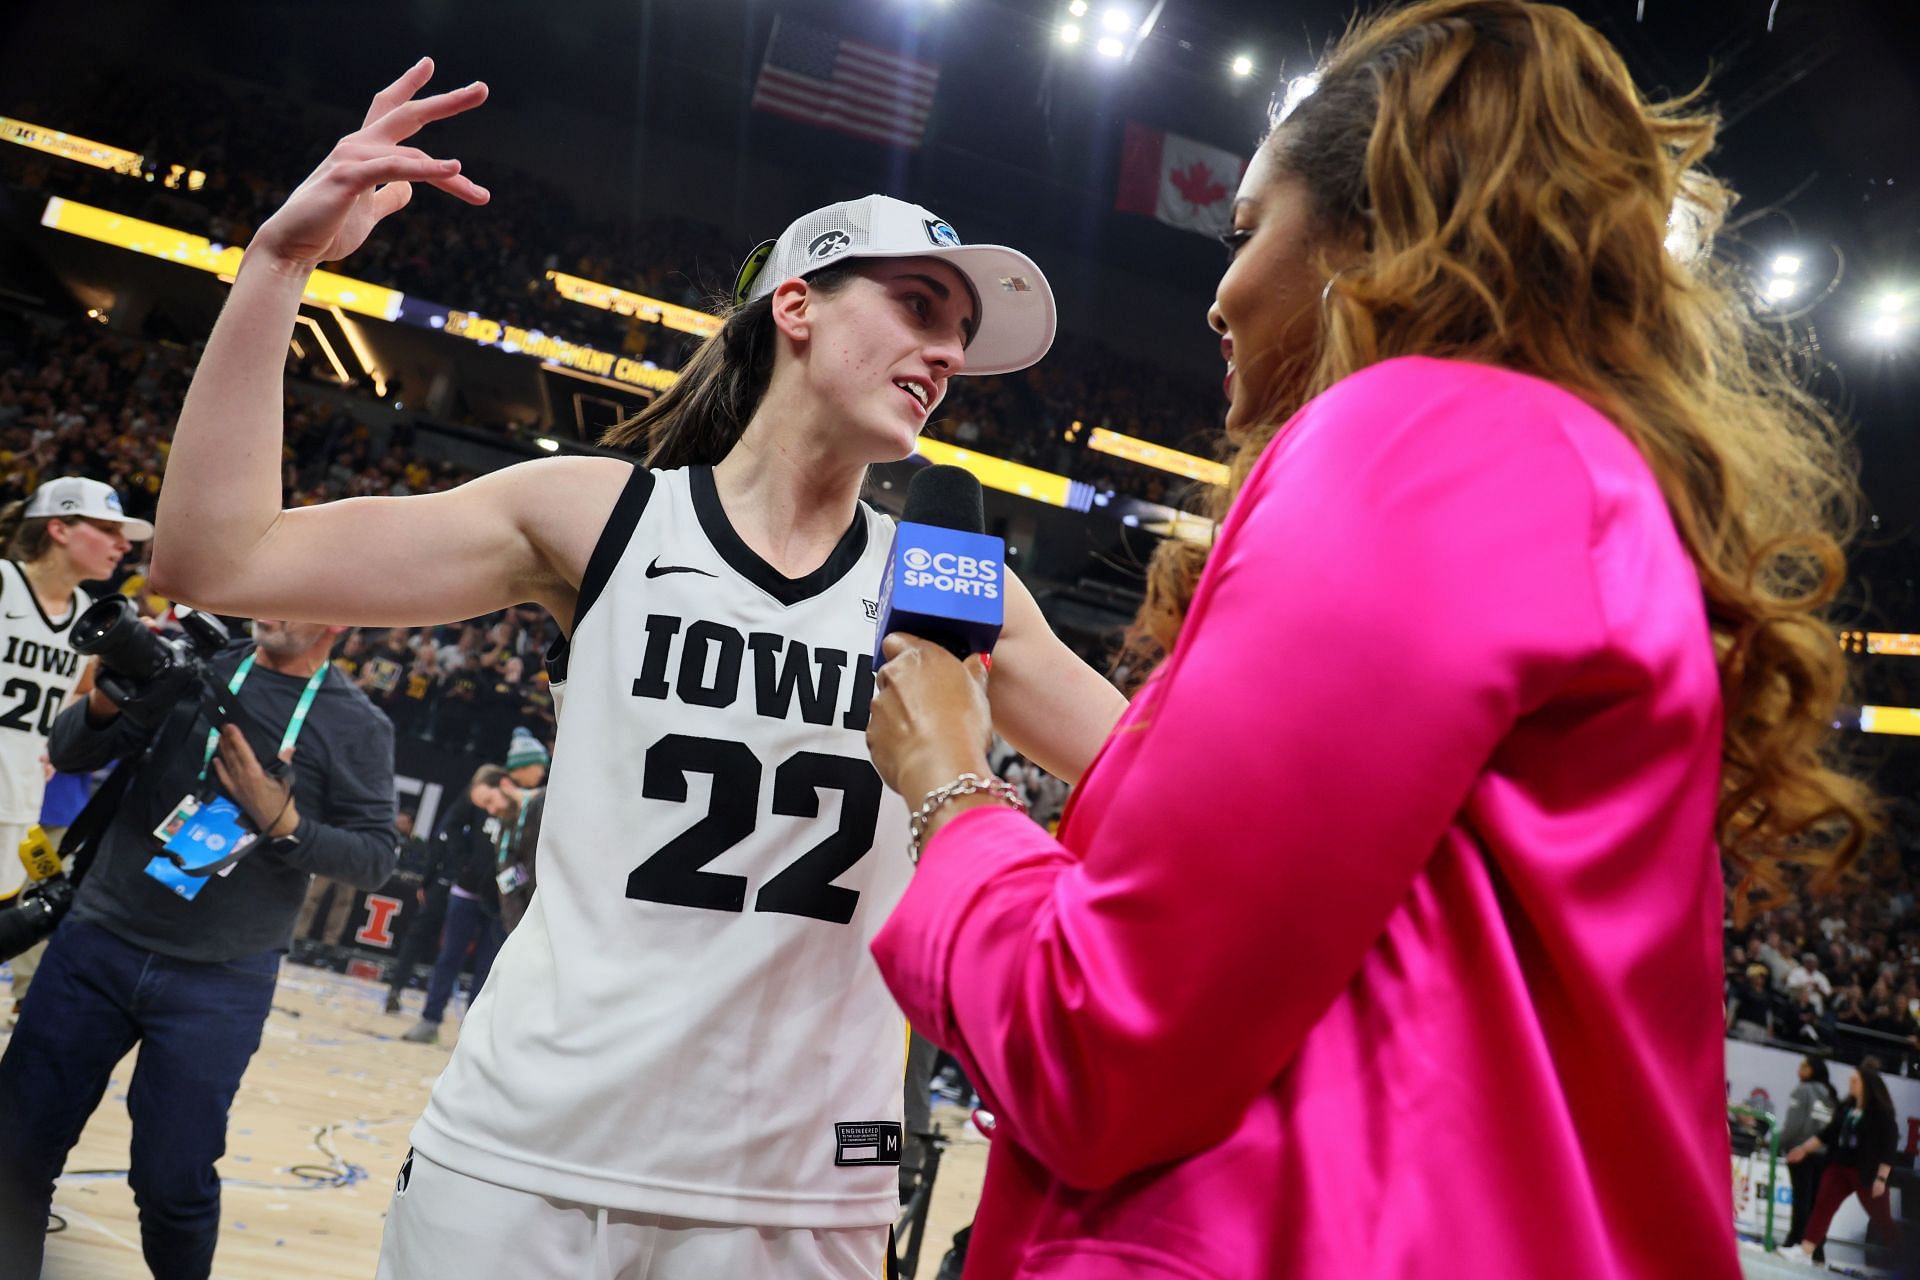 Caitlin Clark of the Iowa Hawkeyes is interviewed after defeating the Nebraska Cornhuskers 94-89 in overtime.